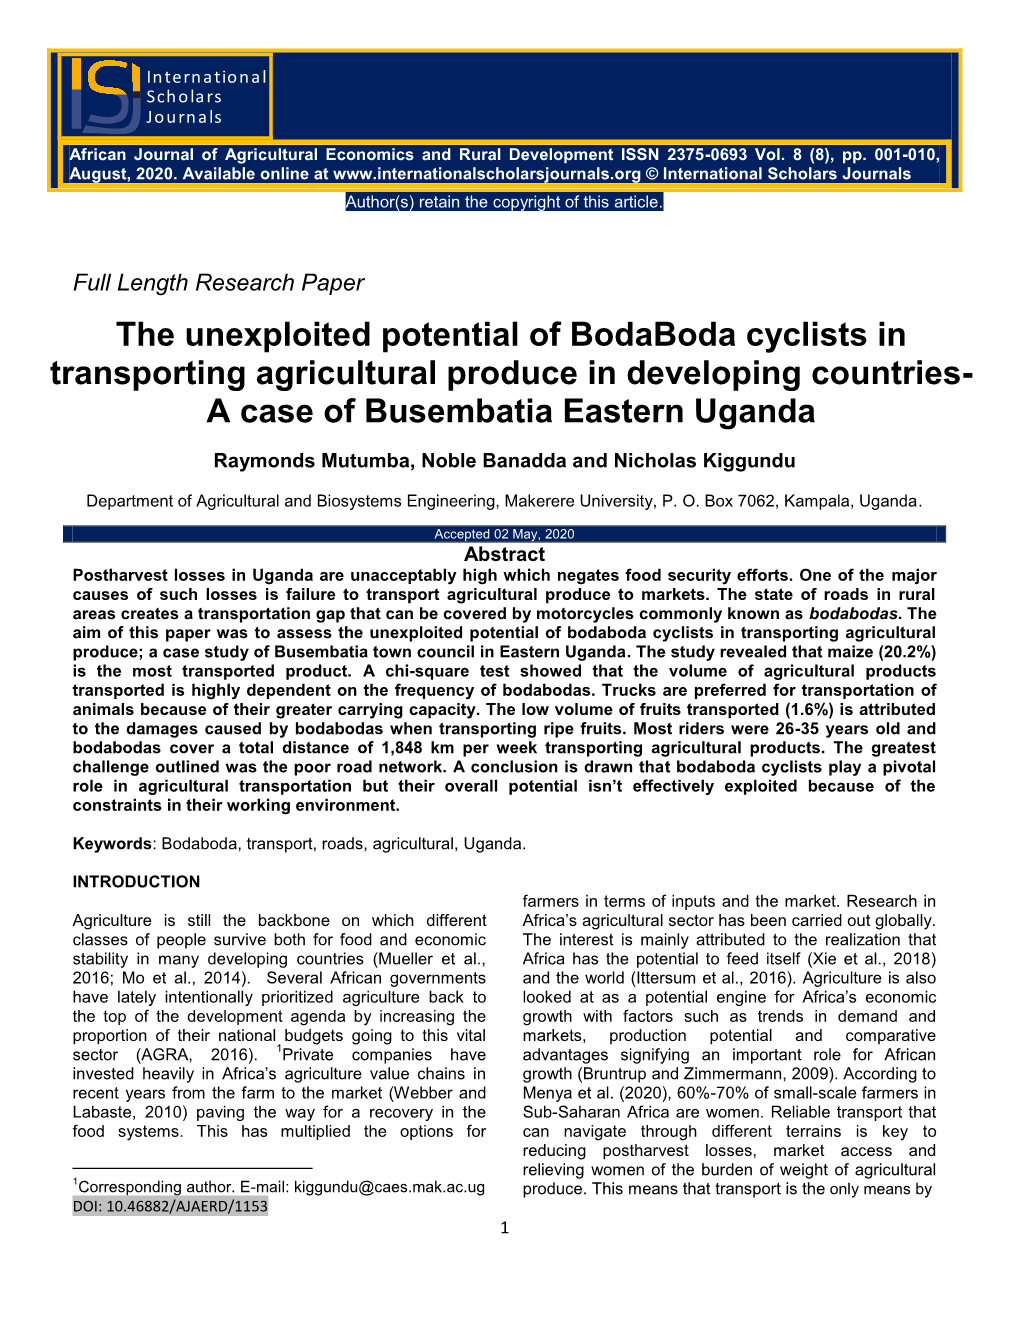 The Unexploited Potential of Bodaboda Cyclists in Transporting Agricultural Produce in Developing Countries- a Case of Busembatia Eastern Uganda